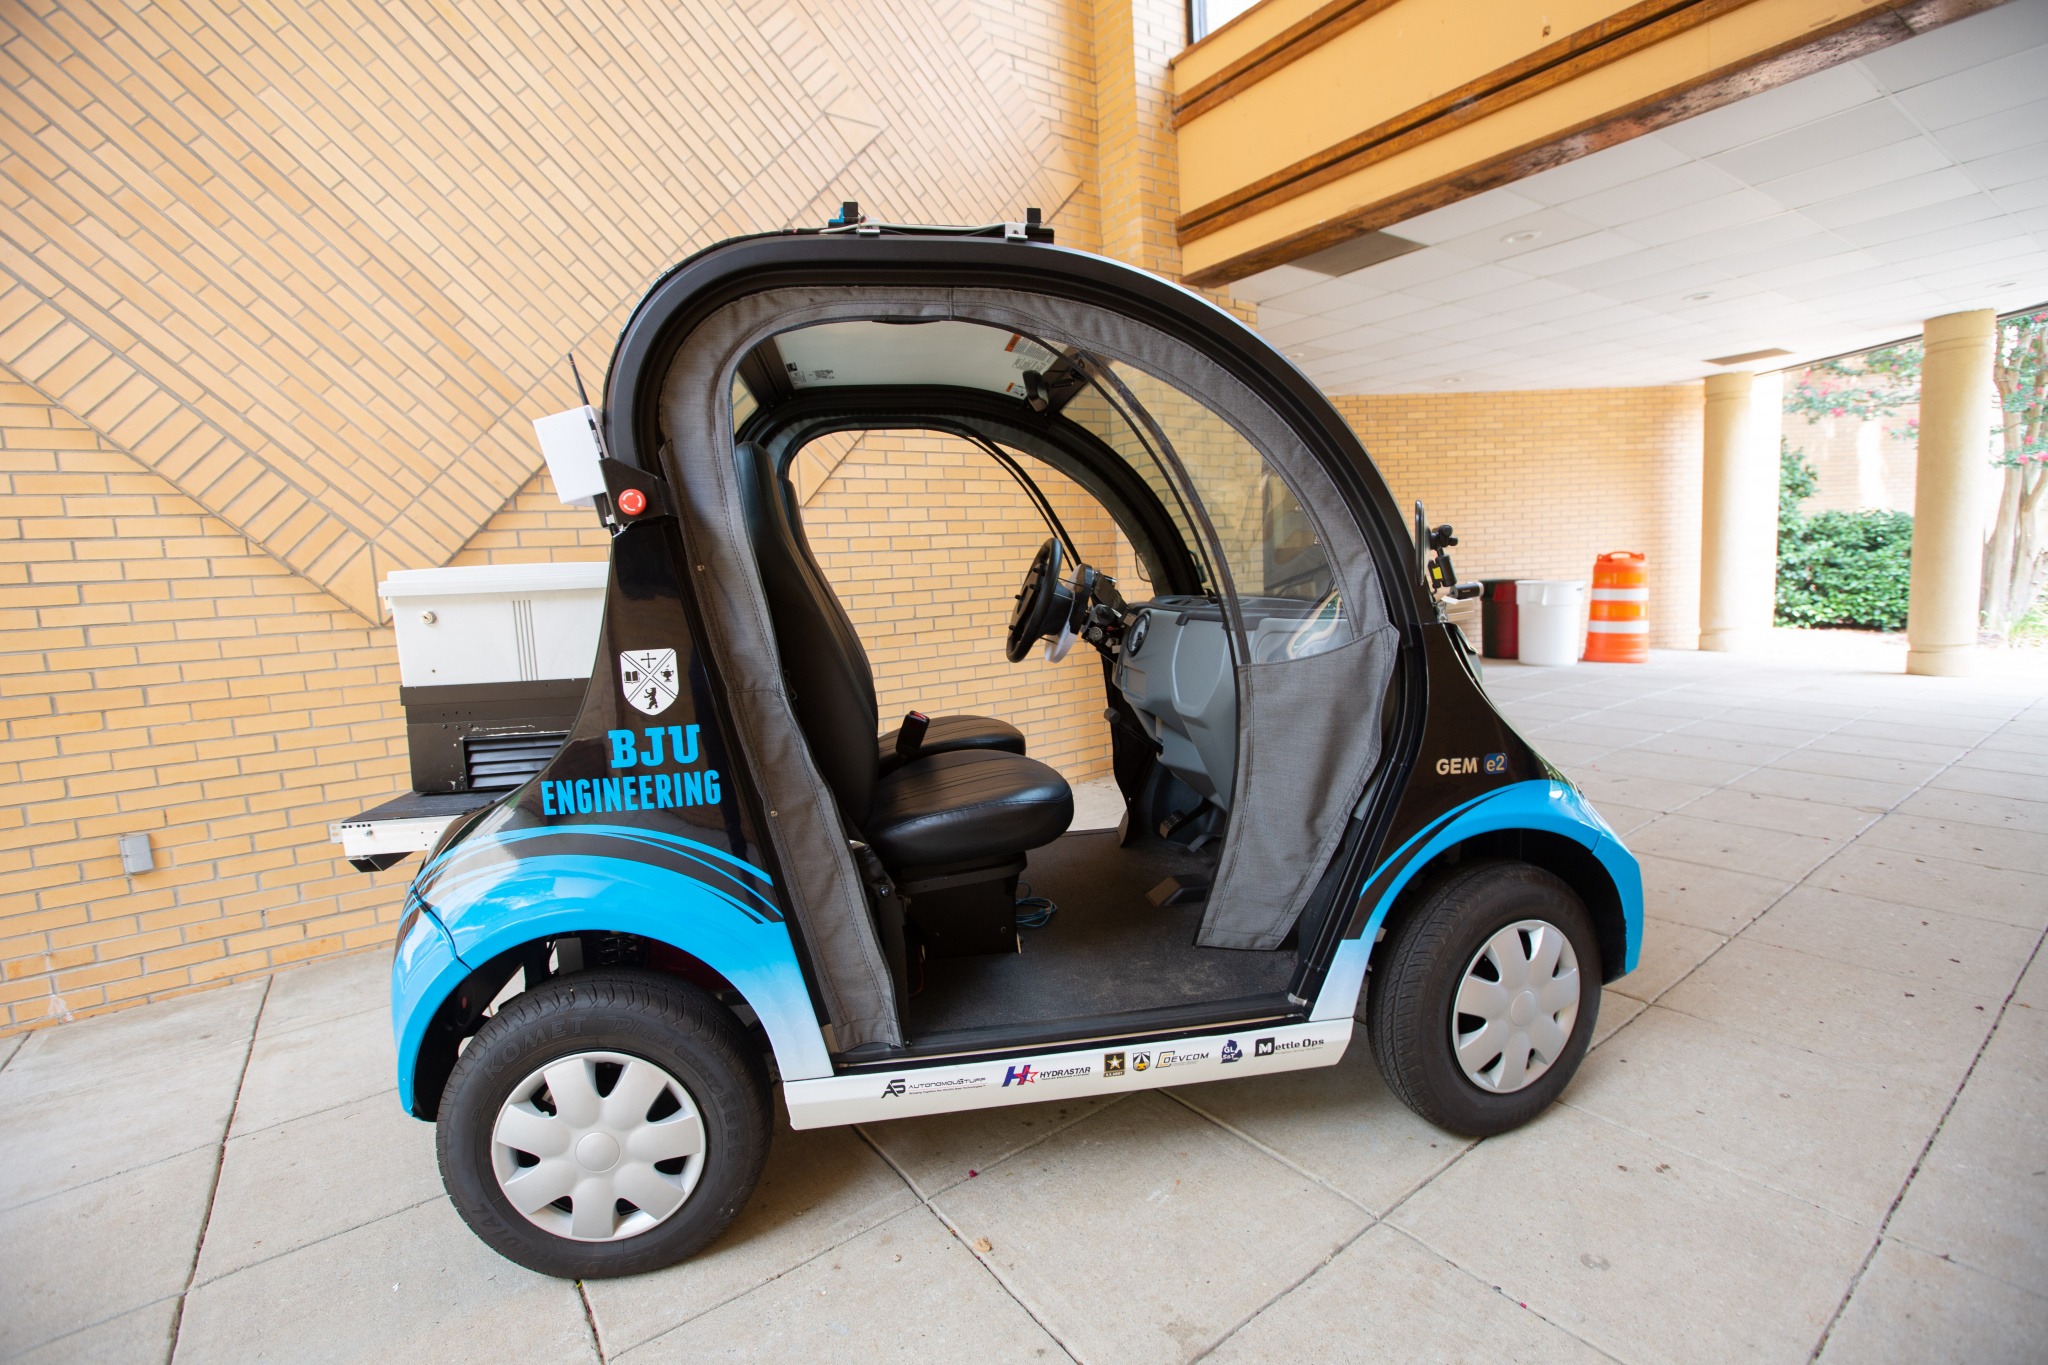 Photo of Bruin 3, the autonomous vehicle designed and built by the Department of Engineering